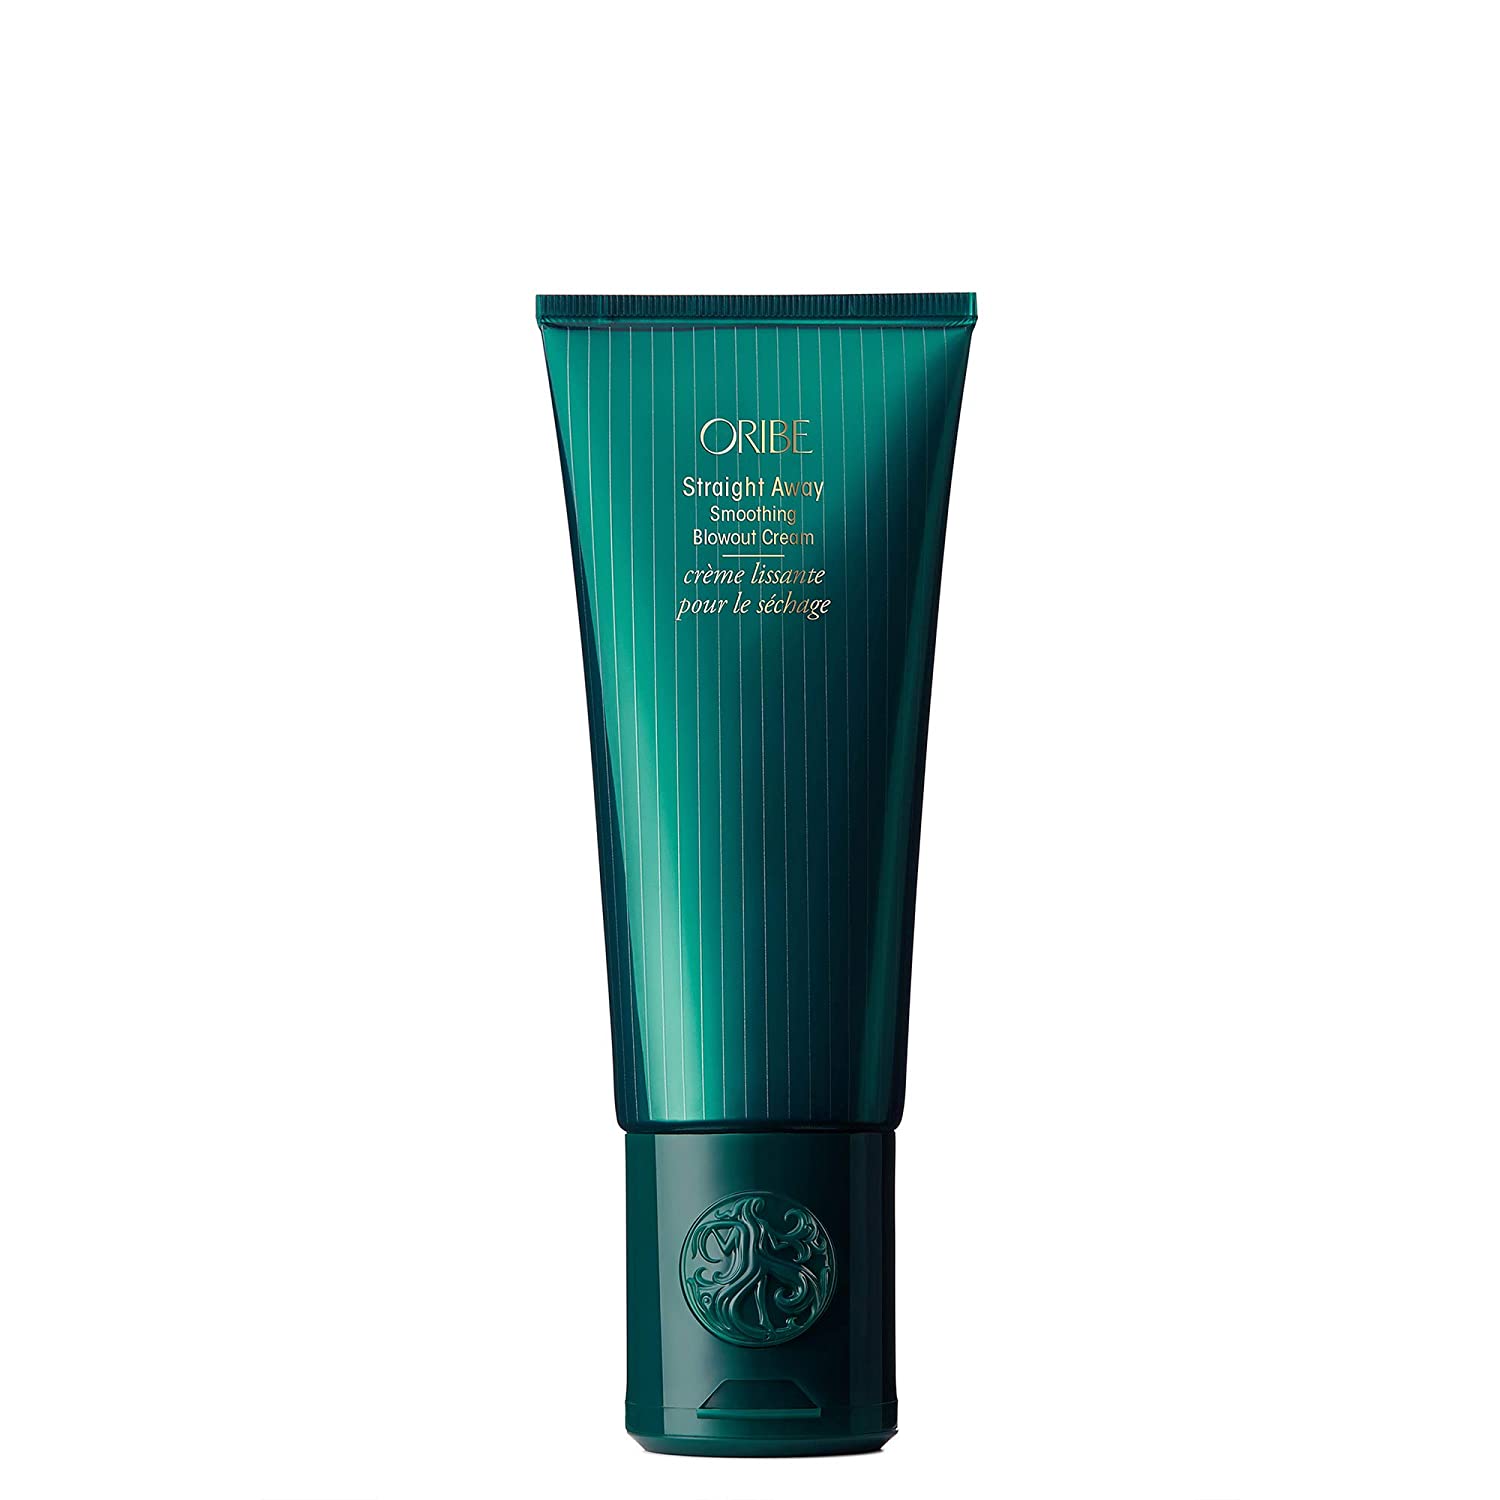 hair straightening products - Oribe's Straight Away Smoothing Blowout Cream